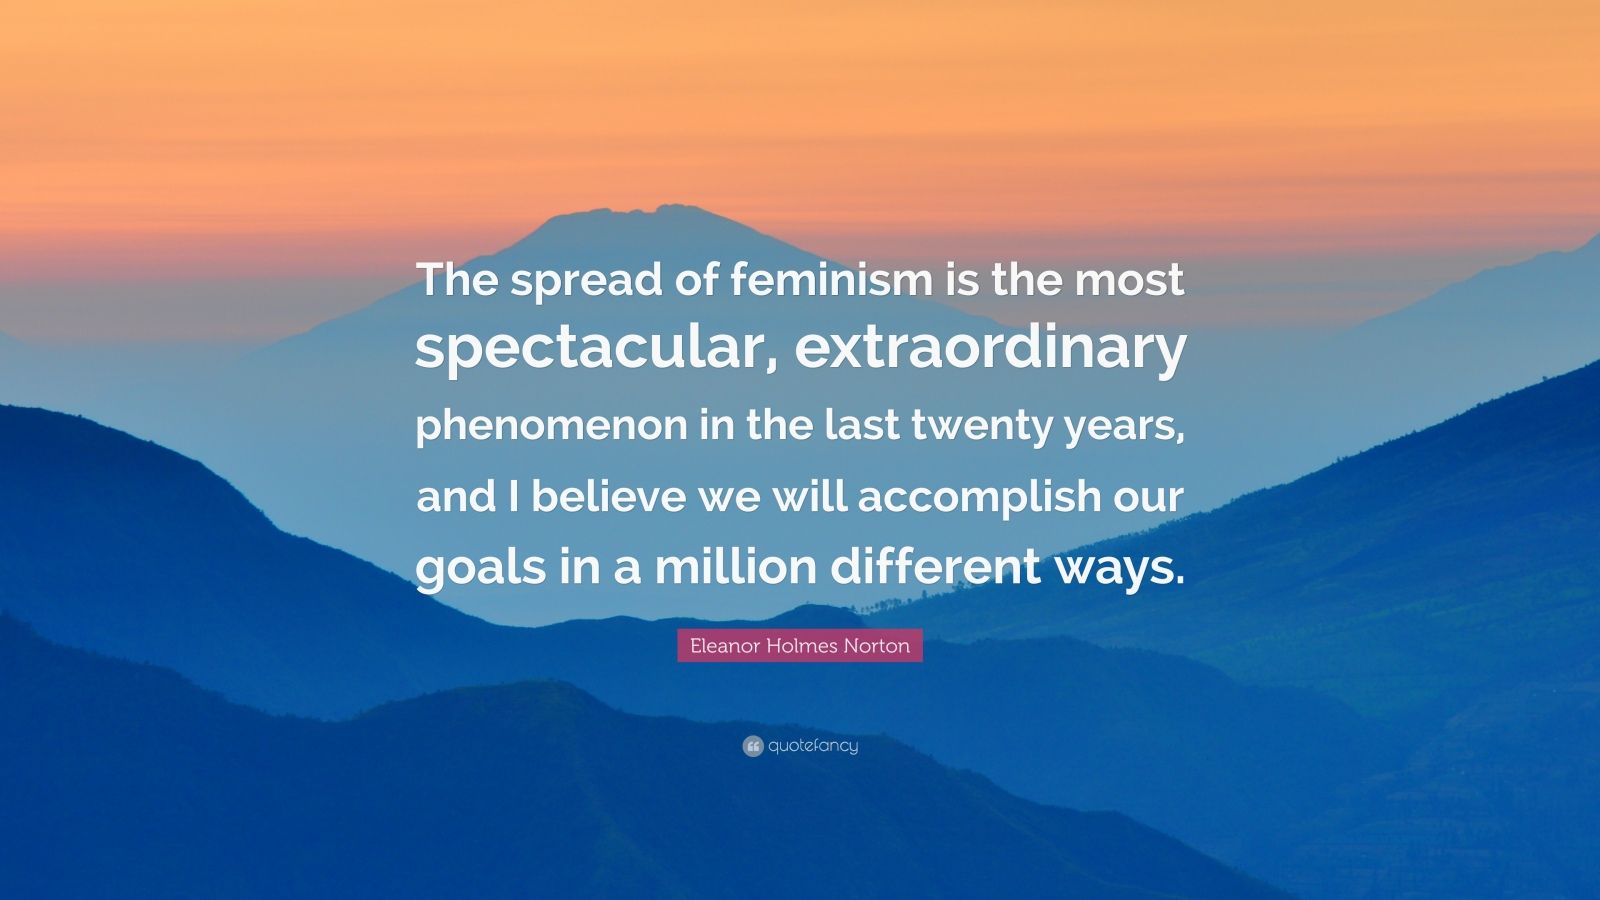 Eleanor Holmes Norton Quote: “The spread of feminism is the most